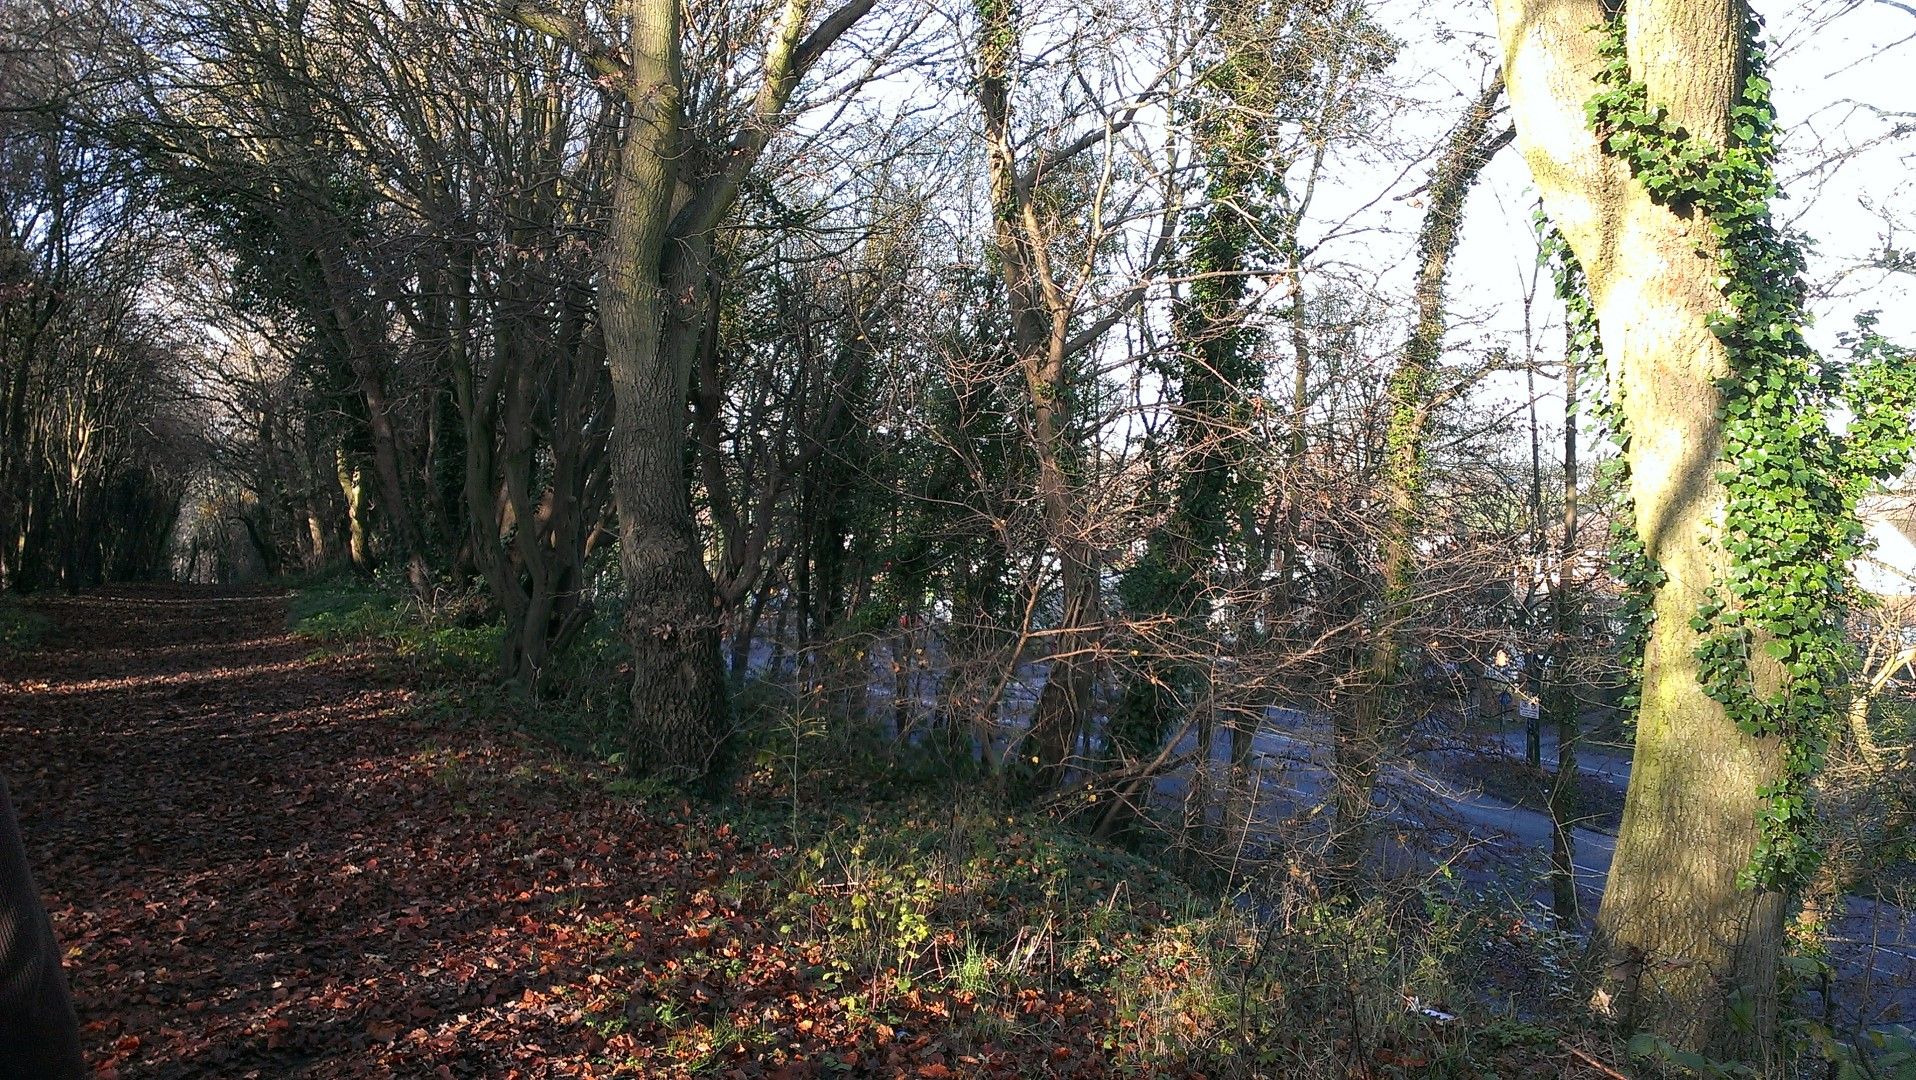 Wooded area found at Rede common